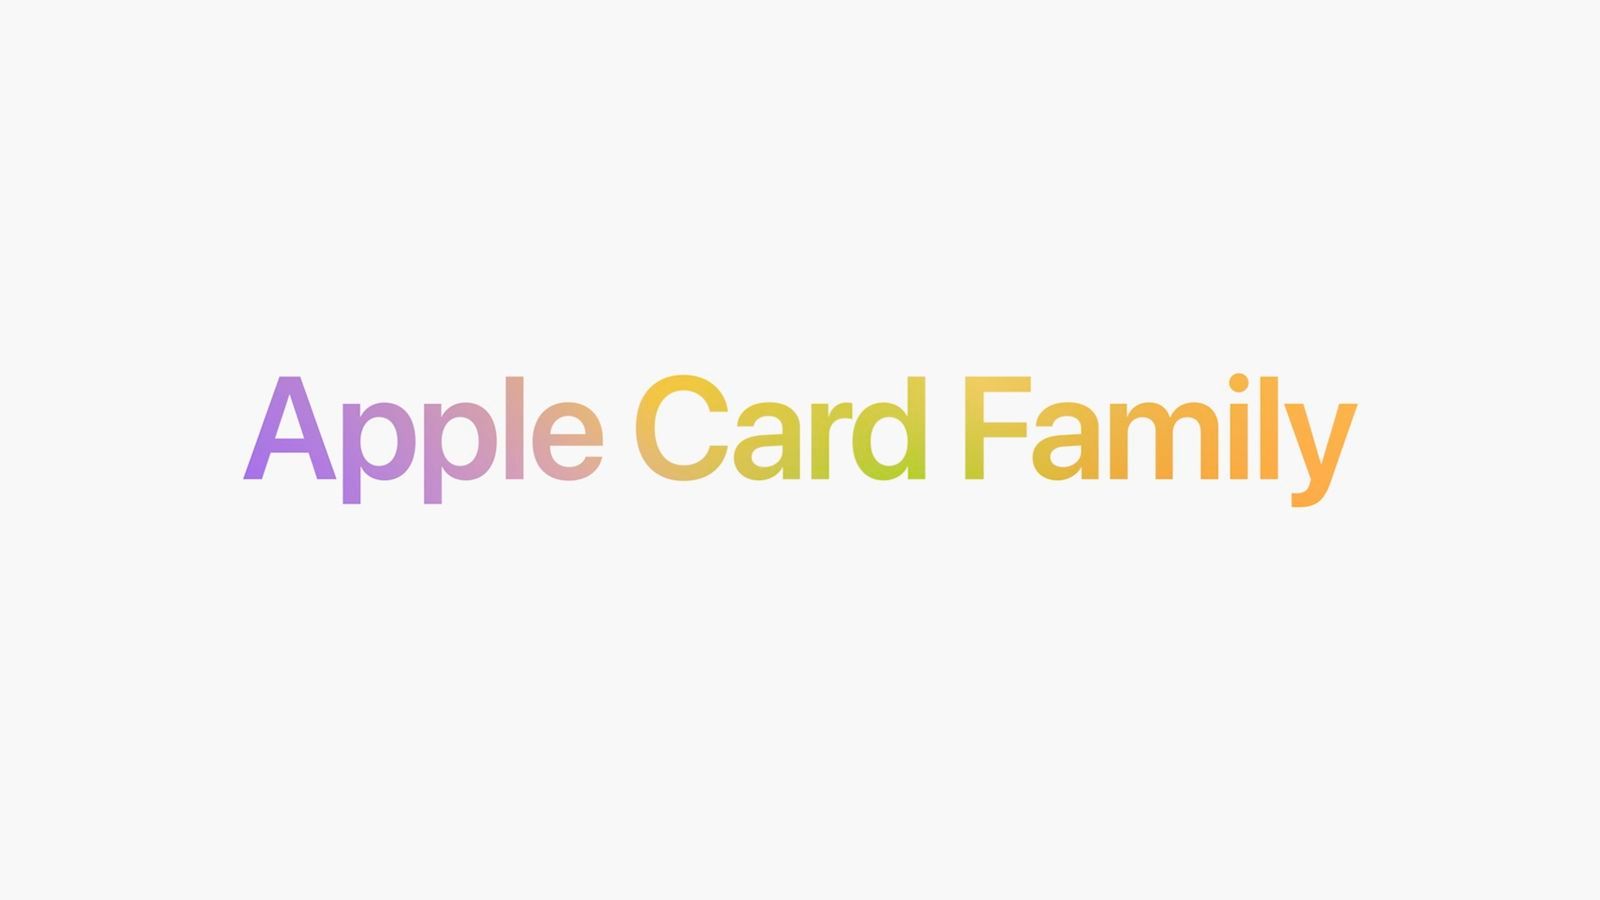 The Apple Card Family graphic from the Spring event